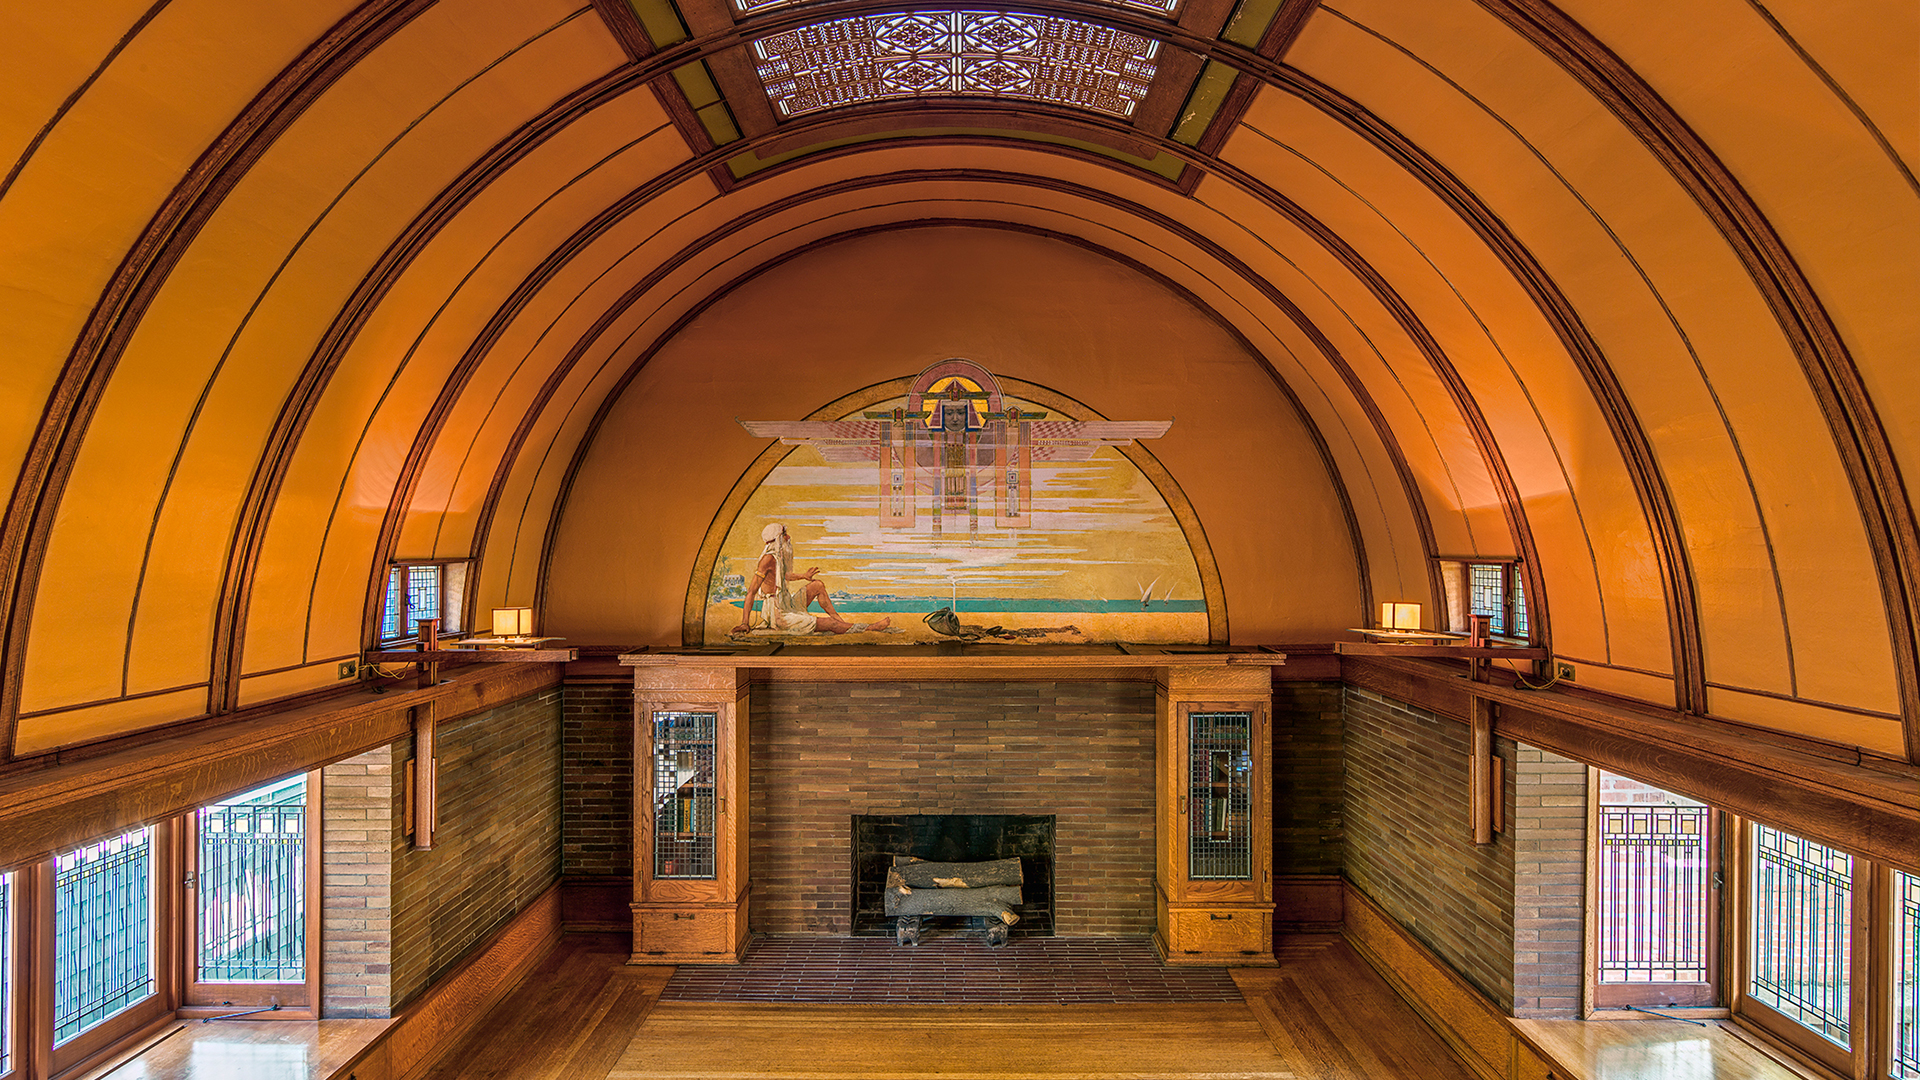 Frank Lloyd Wright's home in Chicago